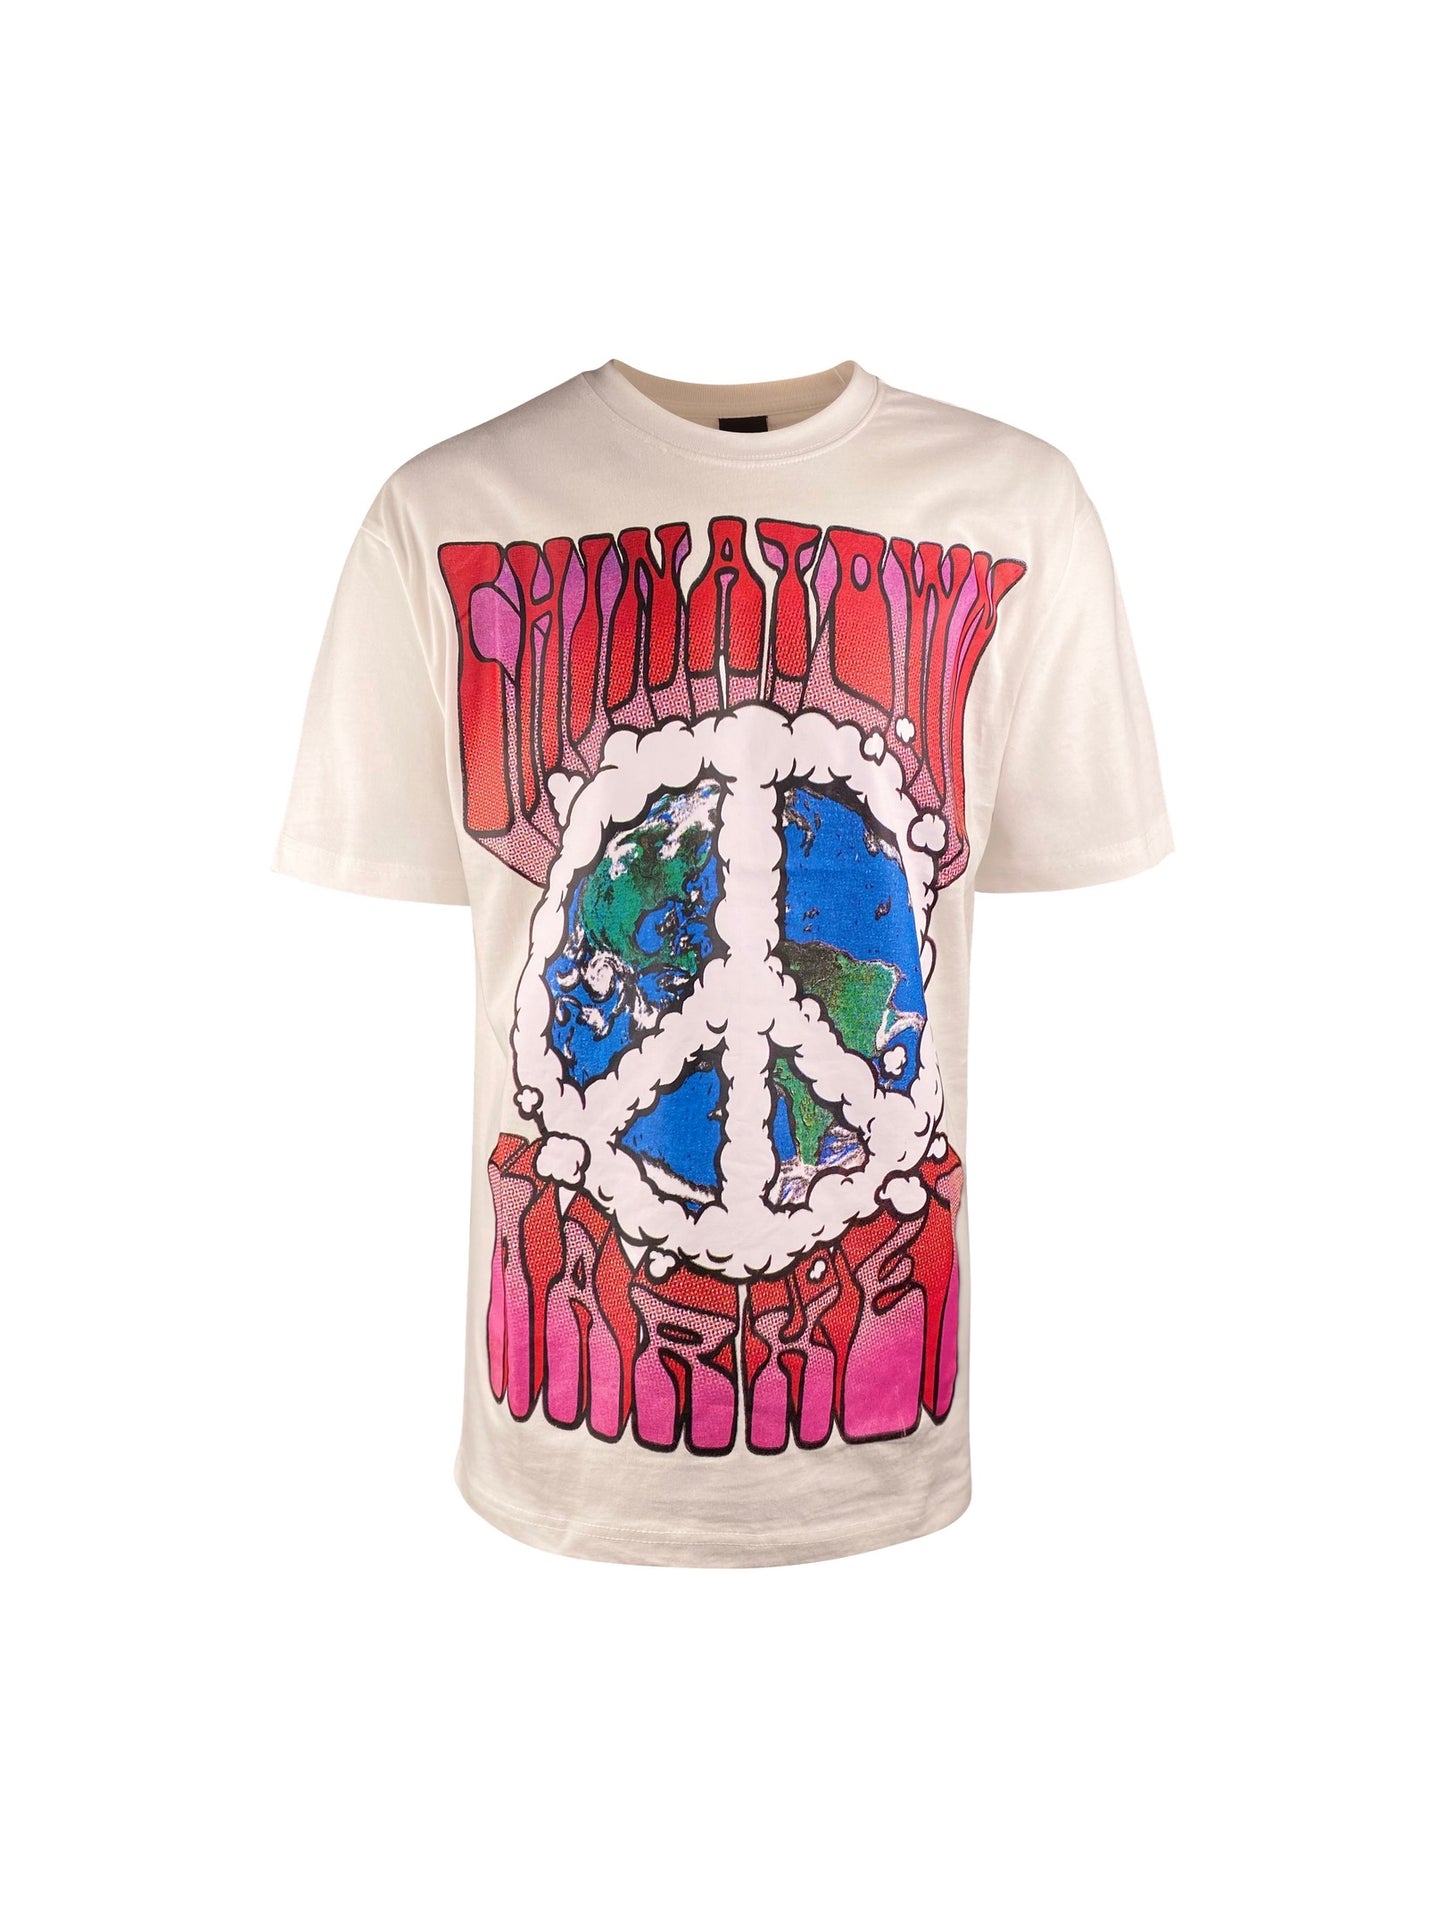 Chinatown Market Tee “Peace On Earth Clouds” -cream